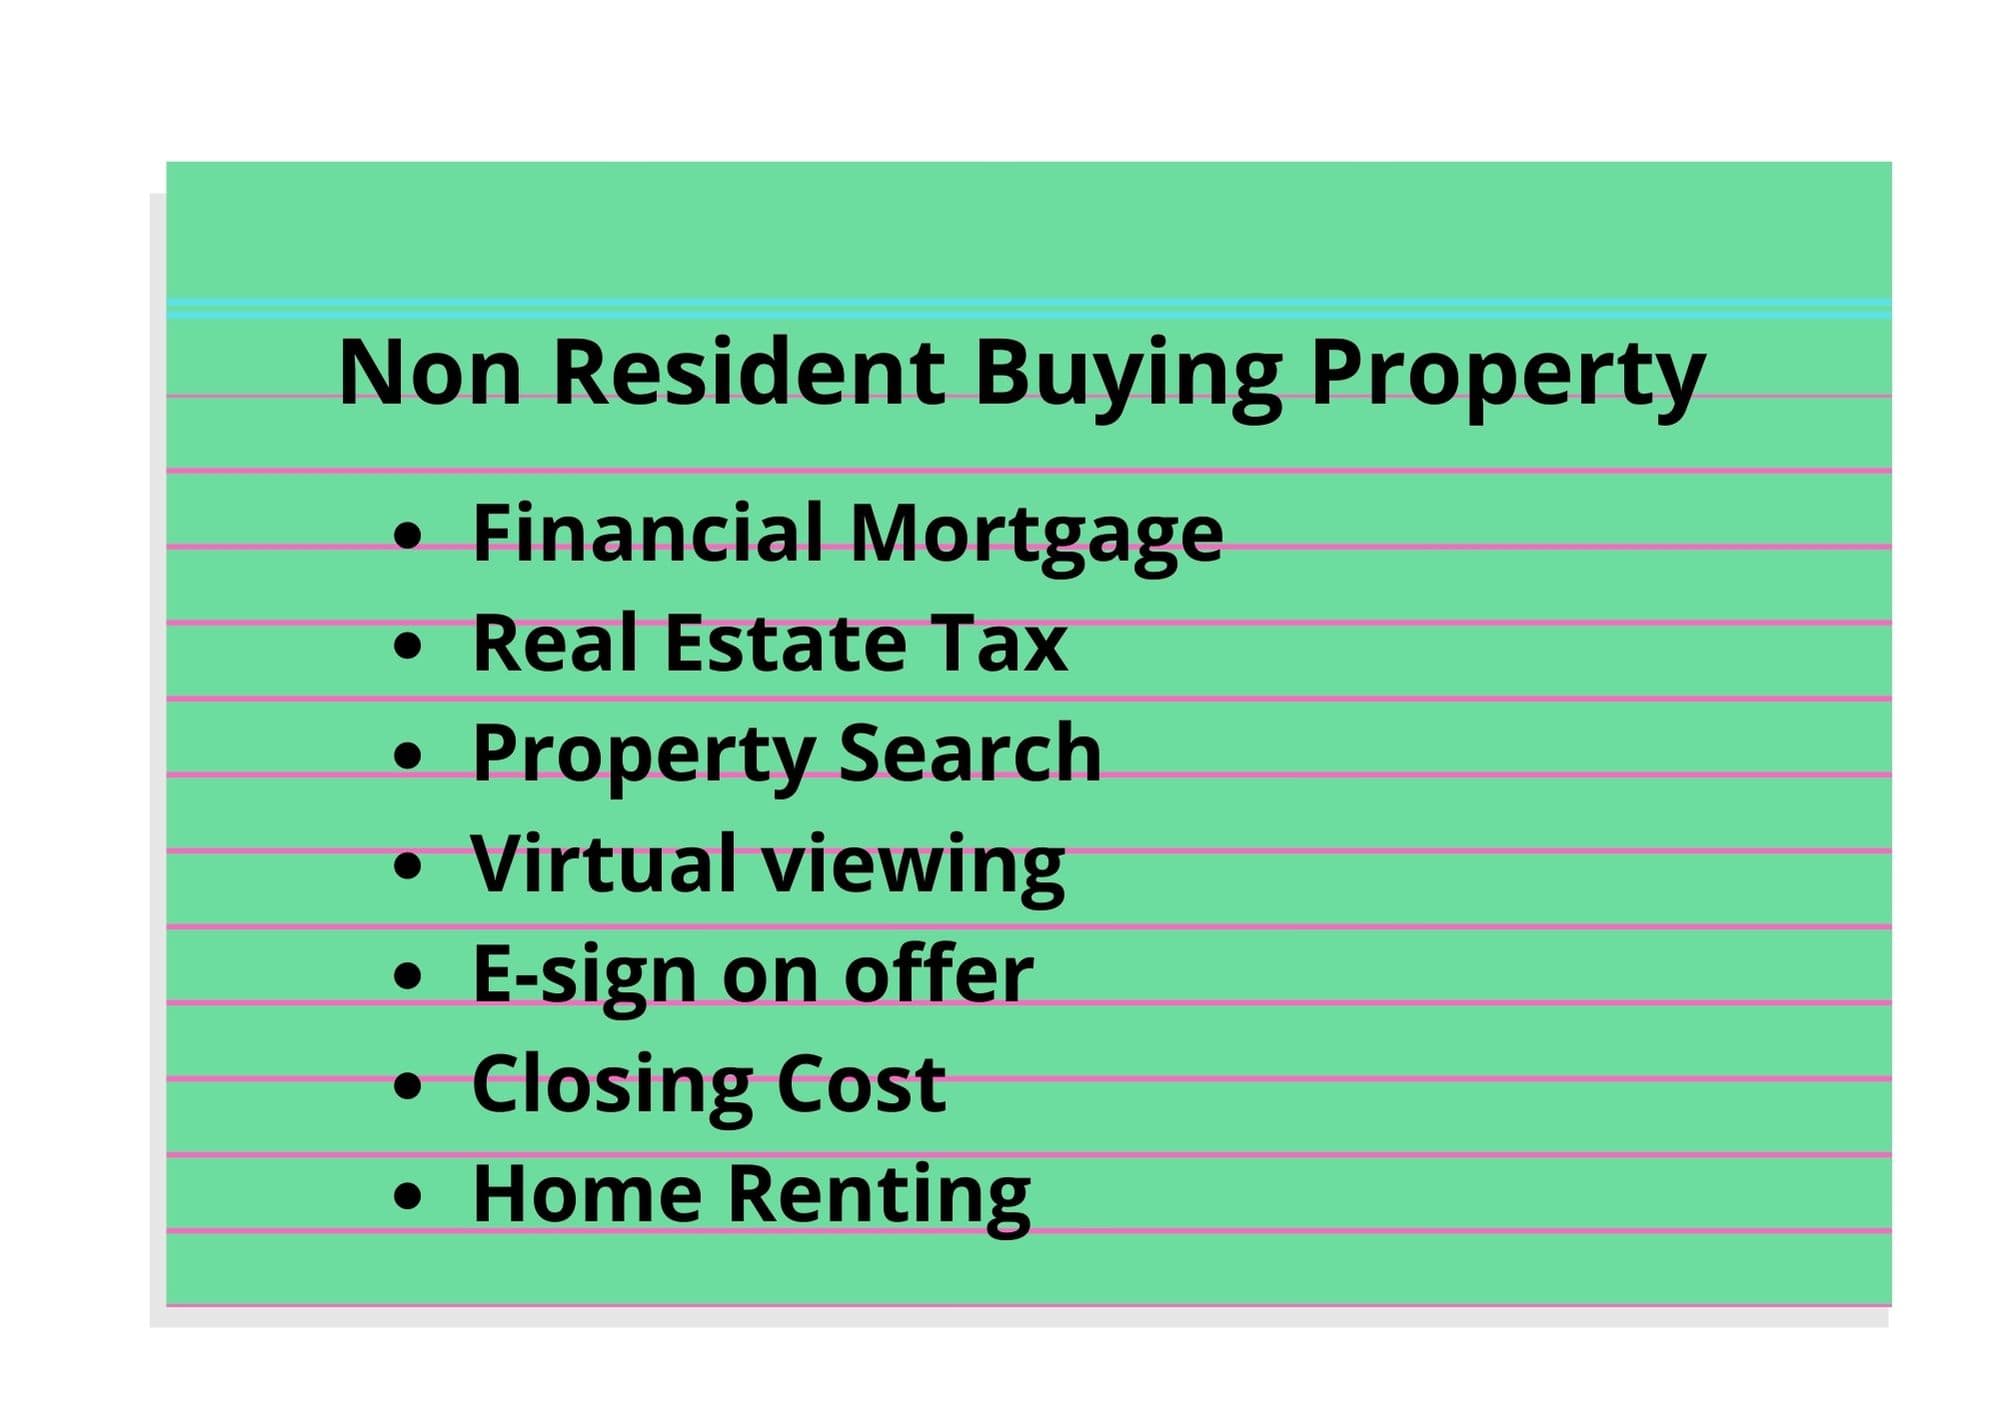 Non Resident Buying Property in Ontario